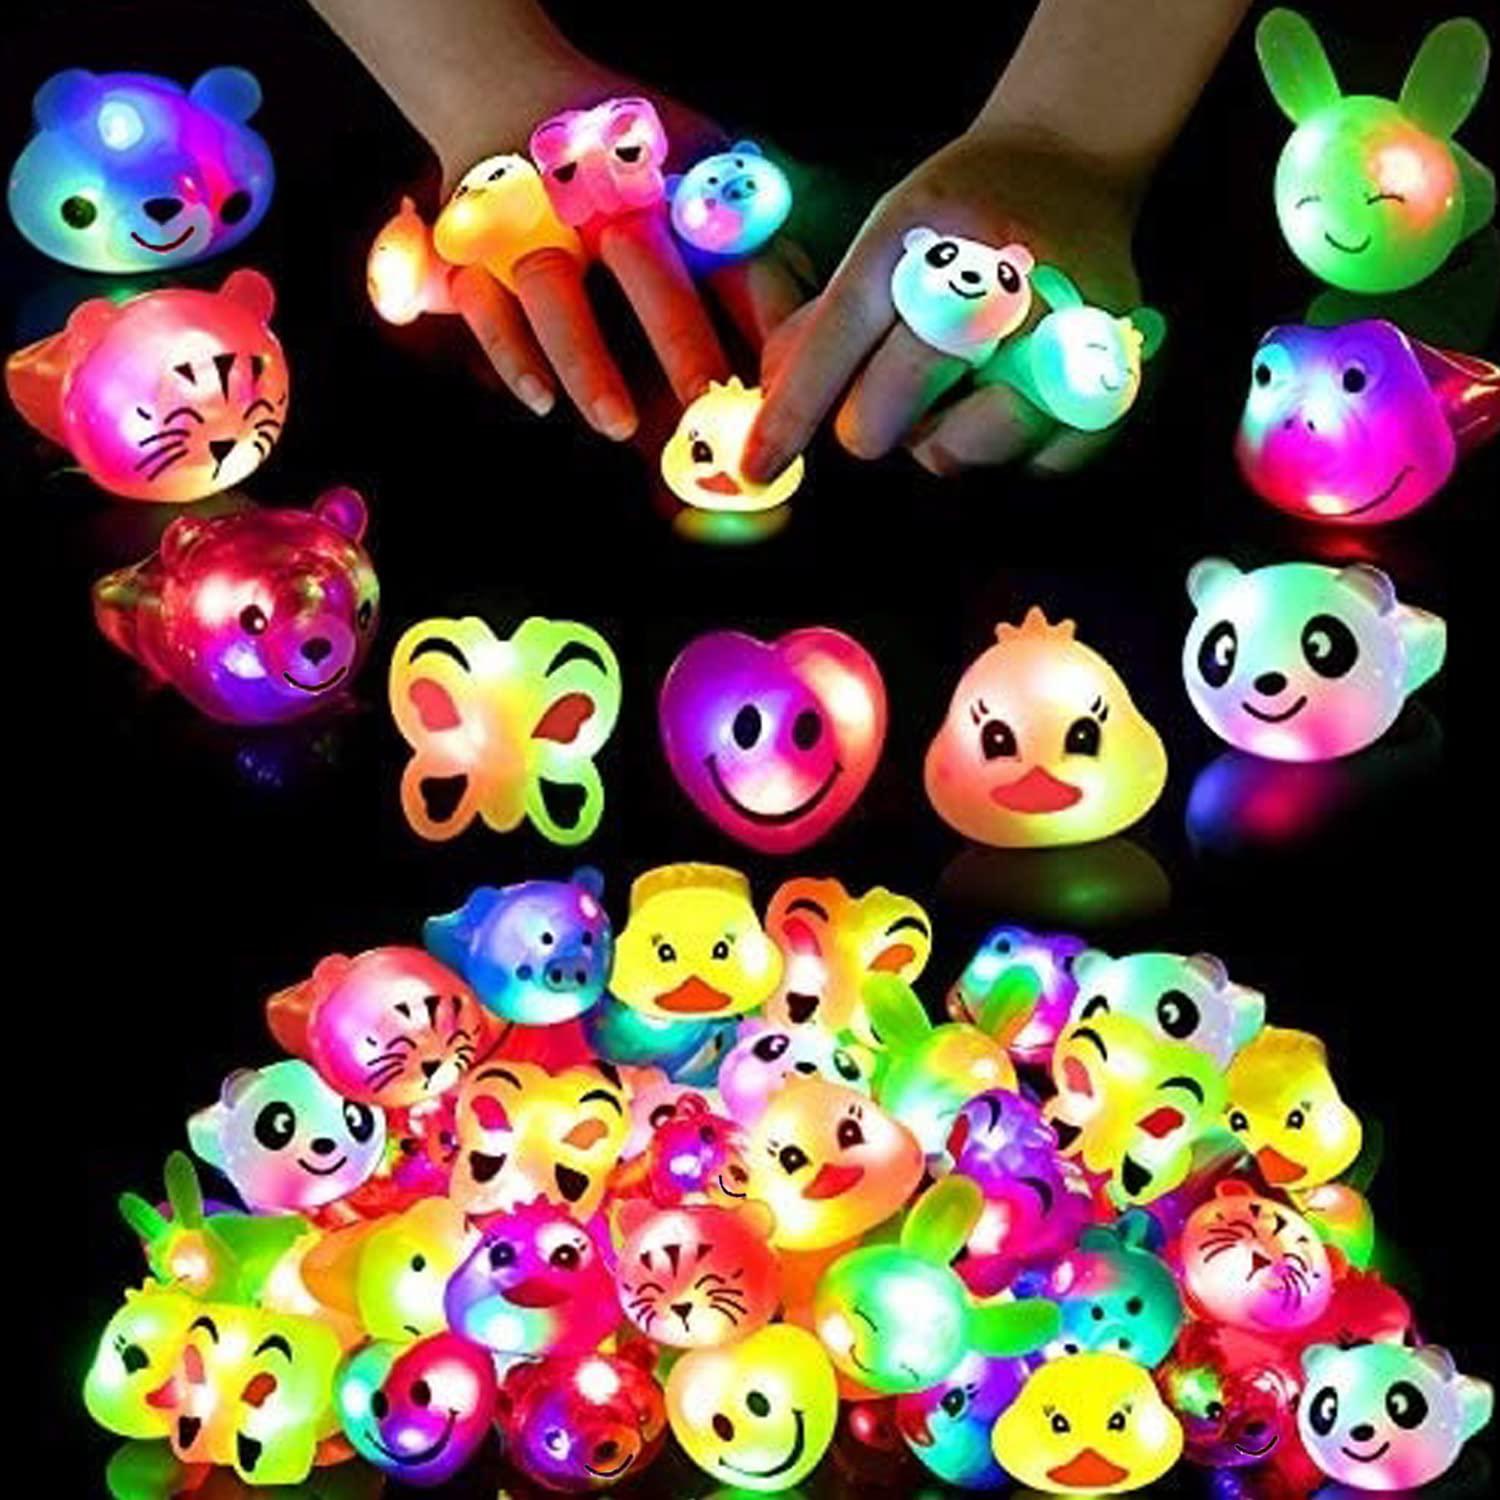 guolz 25 pack light up rings party favors toy for kids 4-8, birthday bag fillers treasure box toys carnival prizes